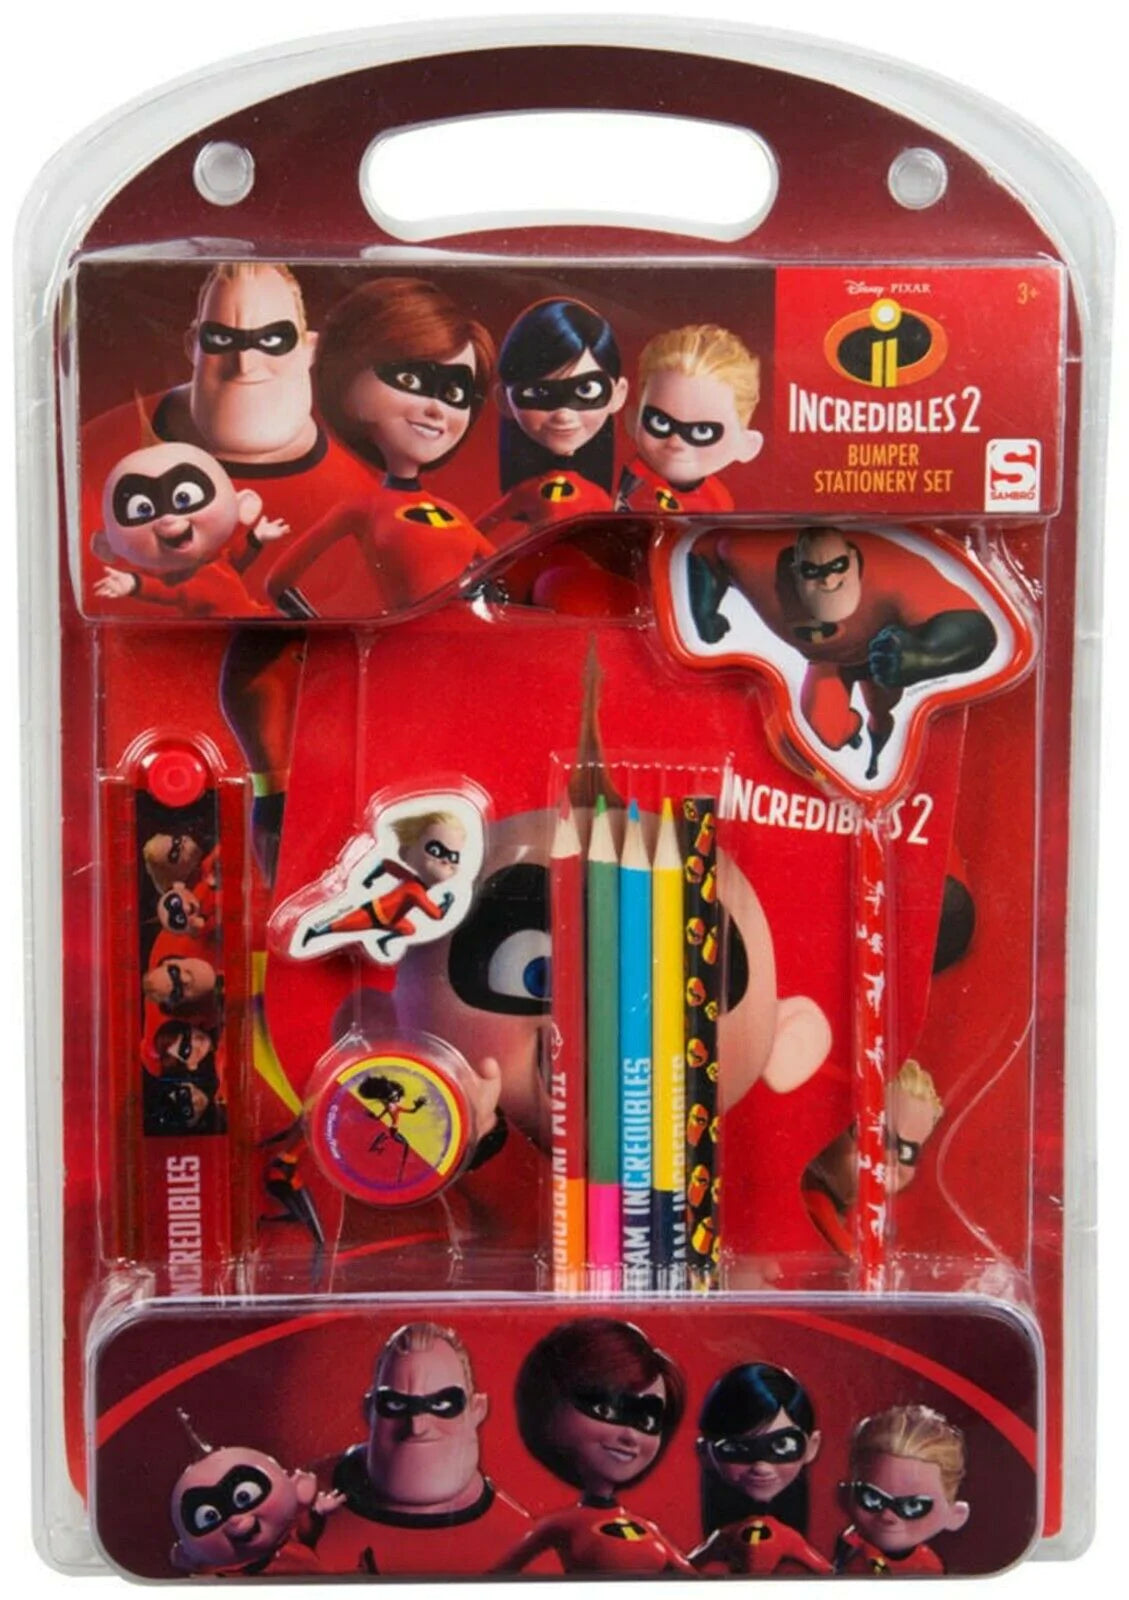 Incredibles 2 Stationery Set